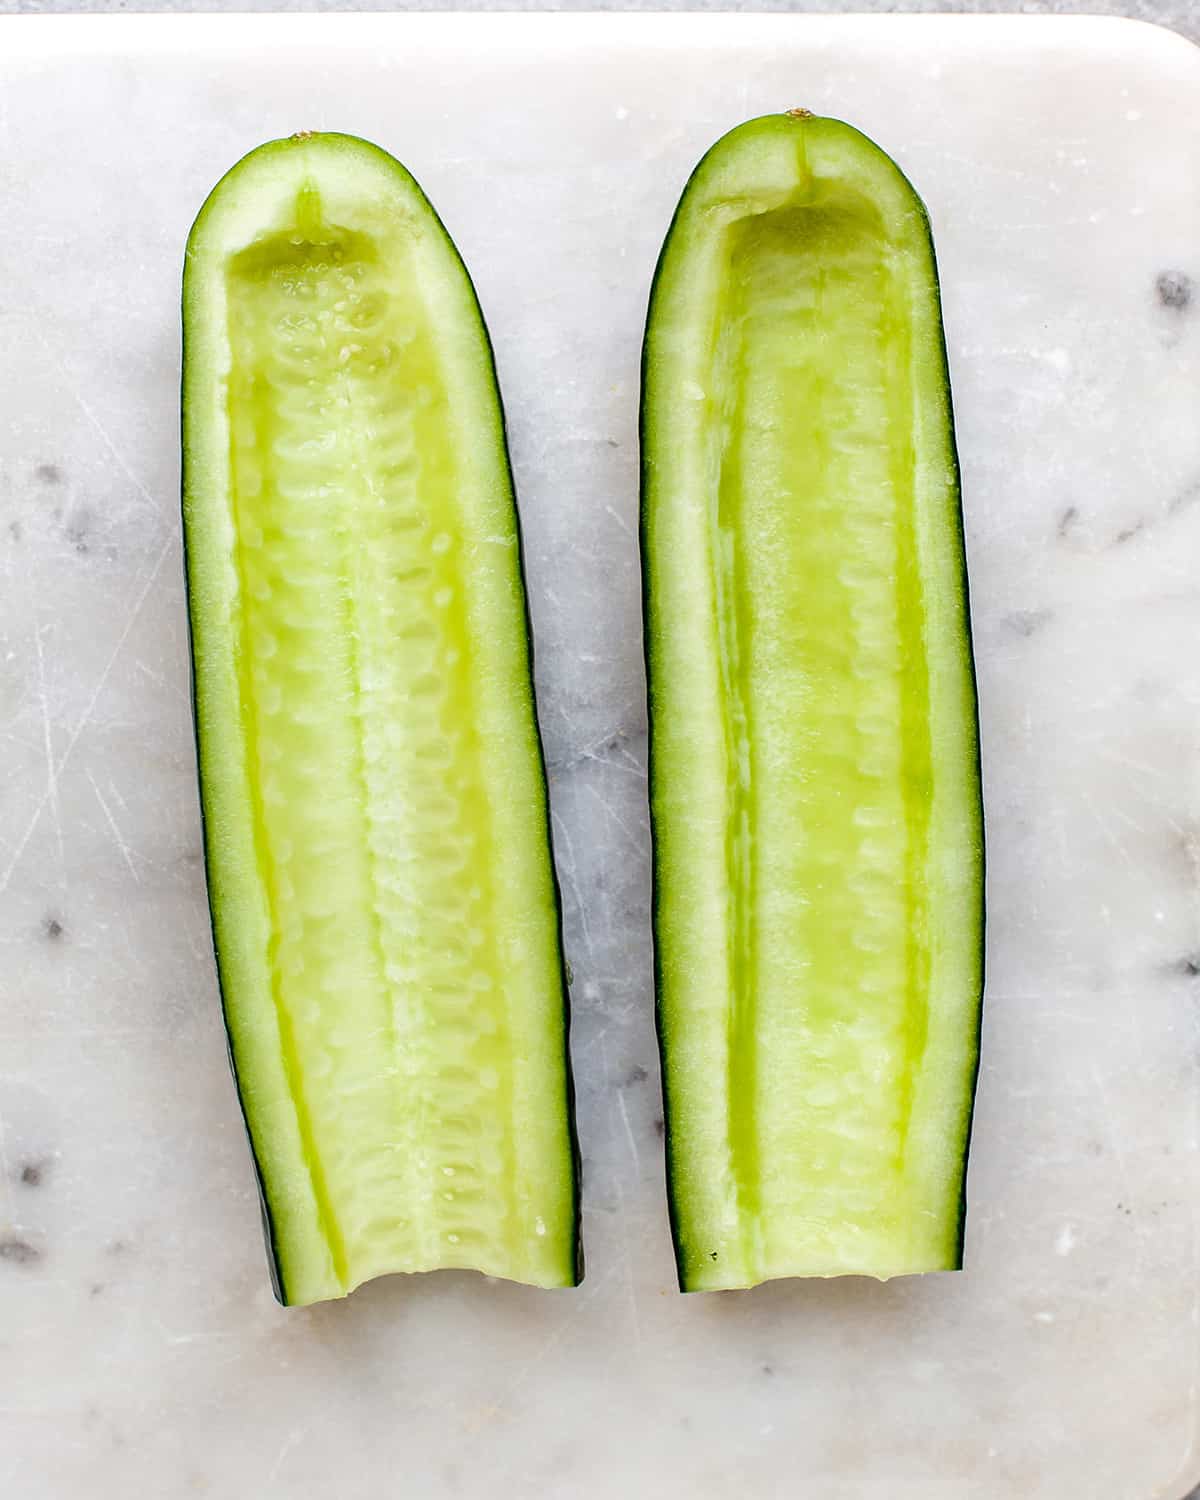 How to Make Tzatziki Sauce - a cucumber cut in half lengthwise and seeded